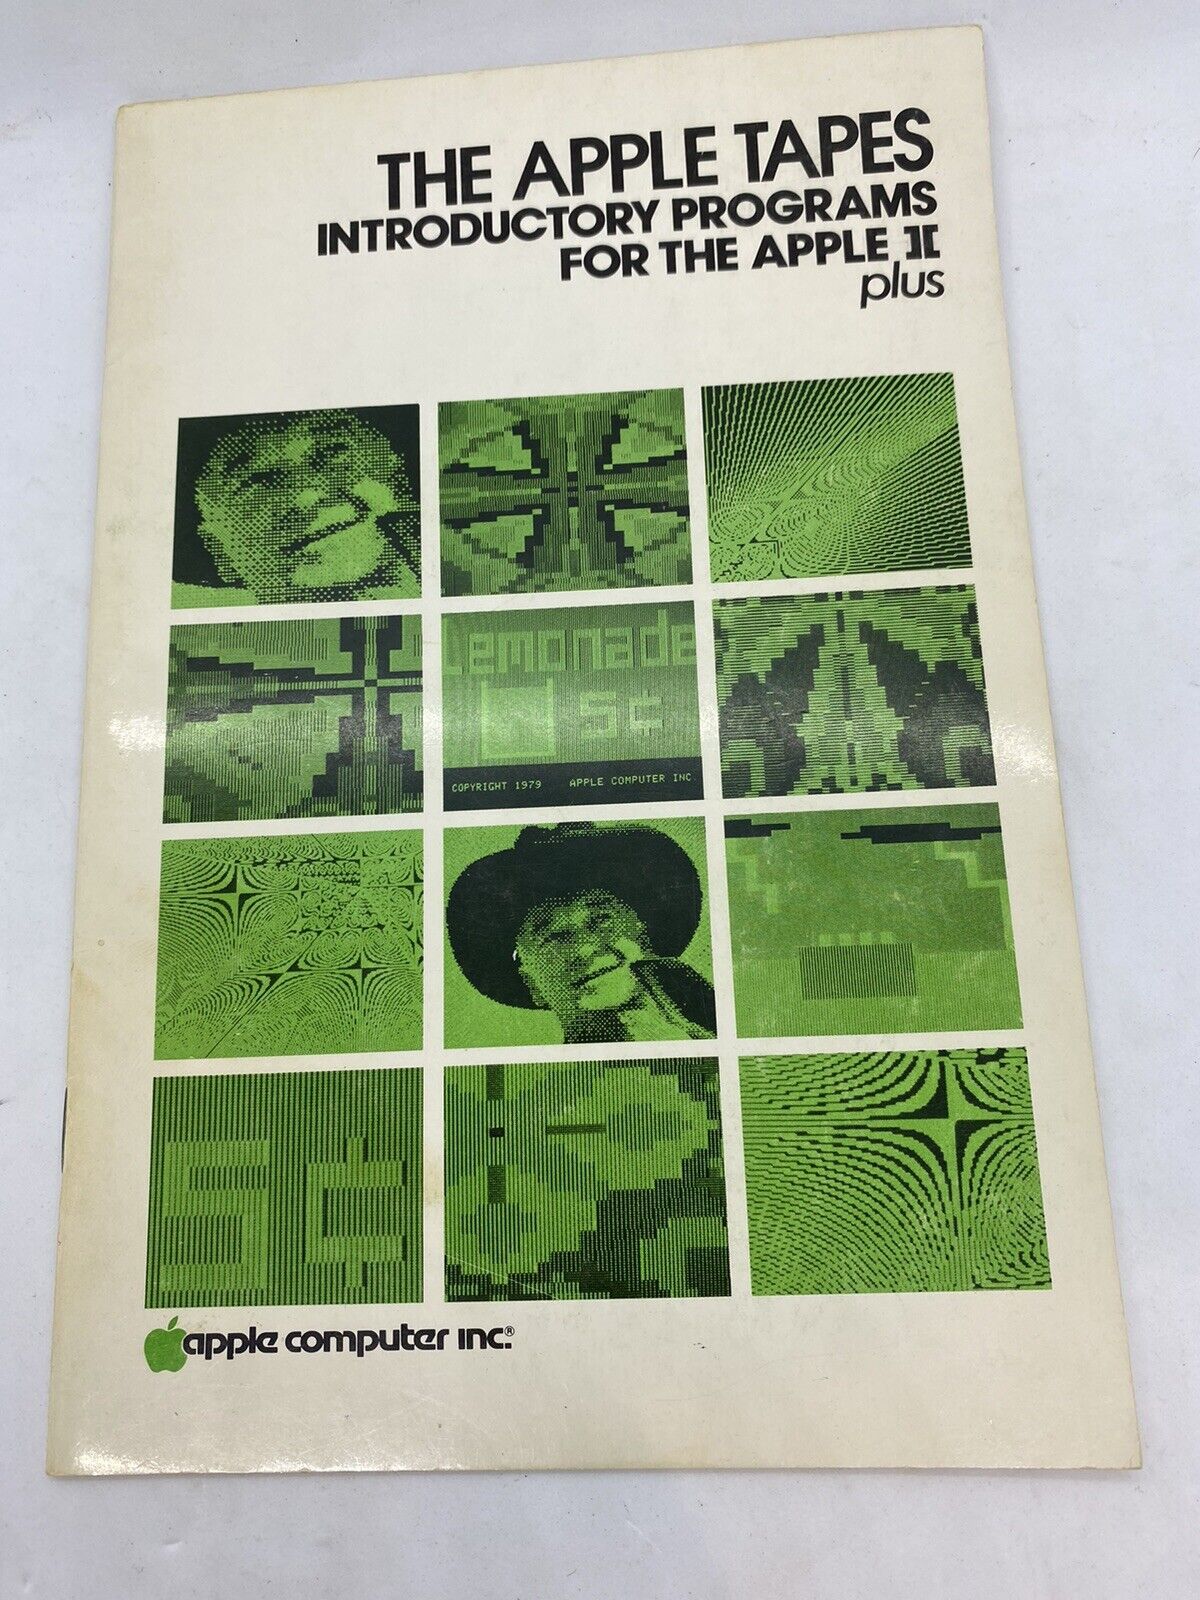 Apple II THE APPLE TAPES Introductory Programs For The Apple II plus 1979